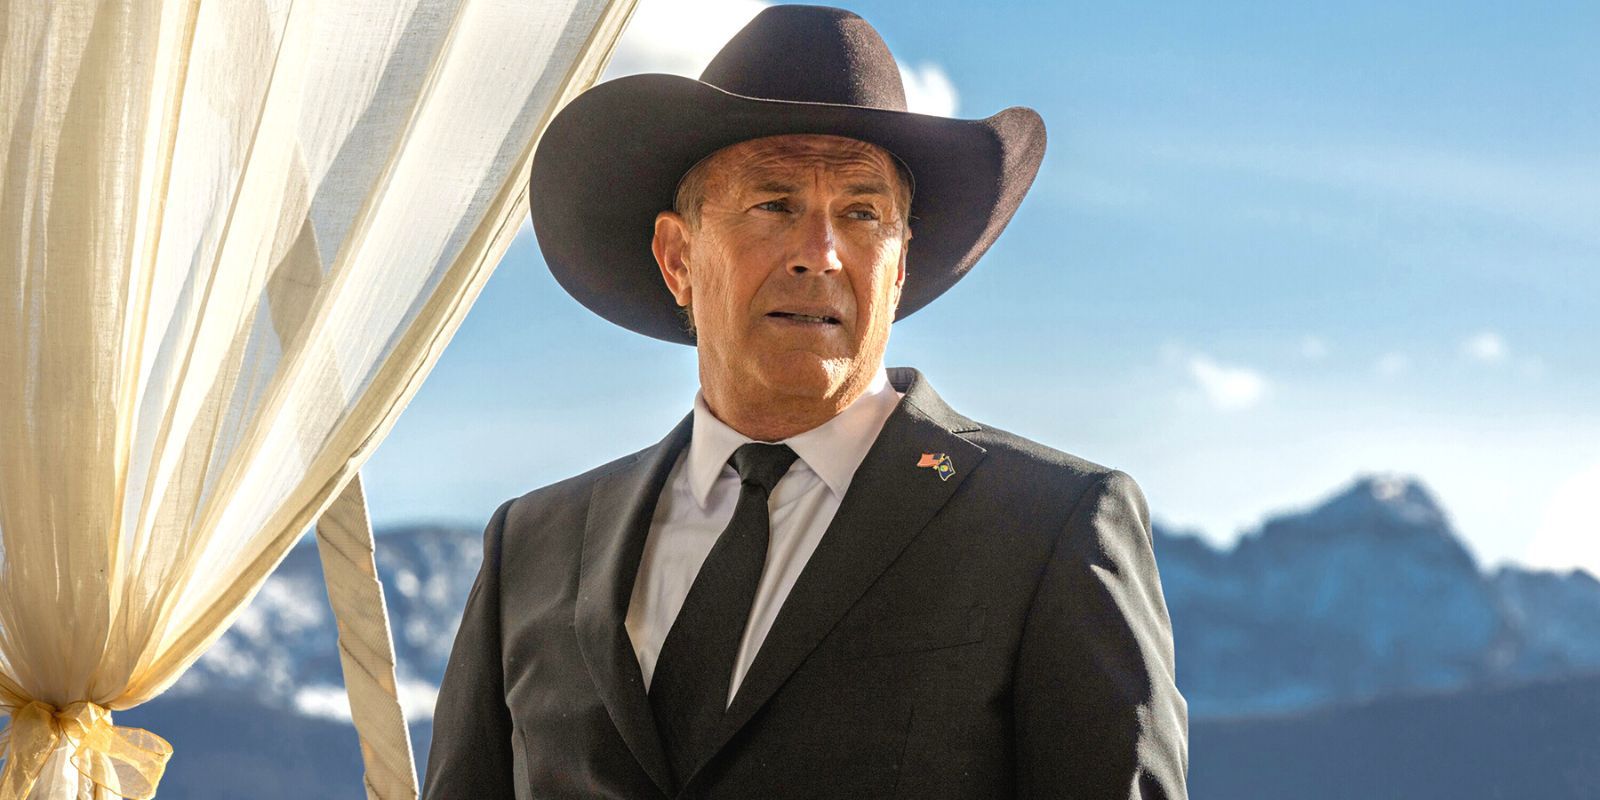 Kevin Costner in a black suit an ten-gallon hat, standing in front of a mountain range